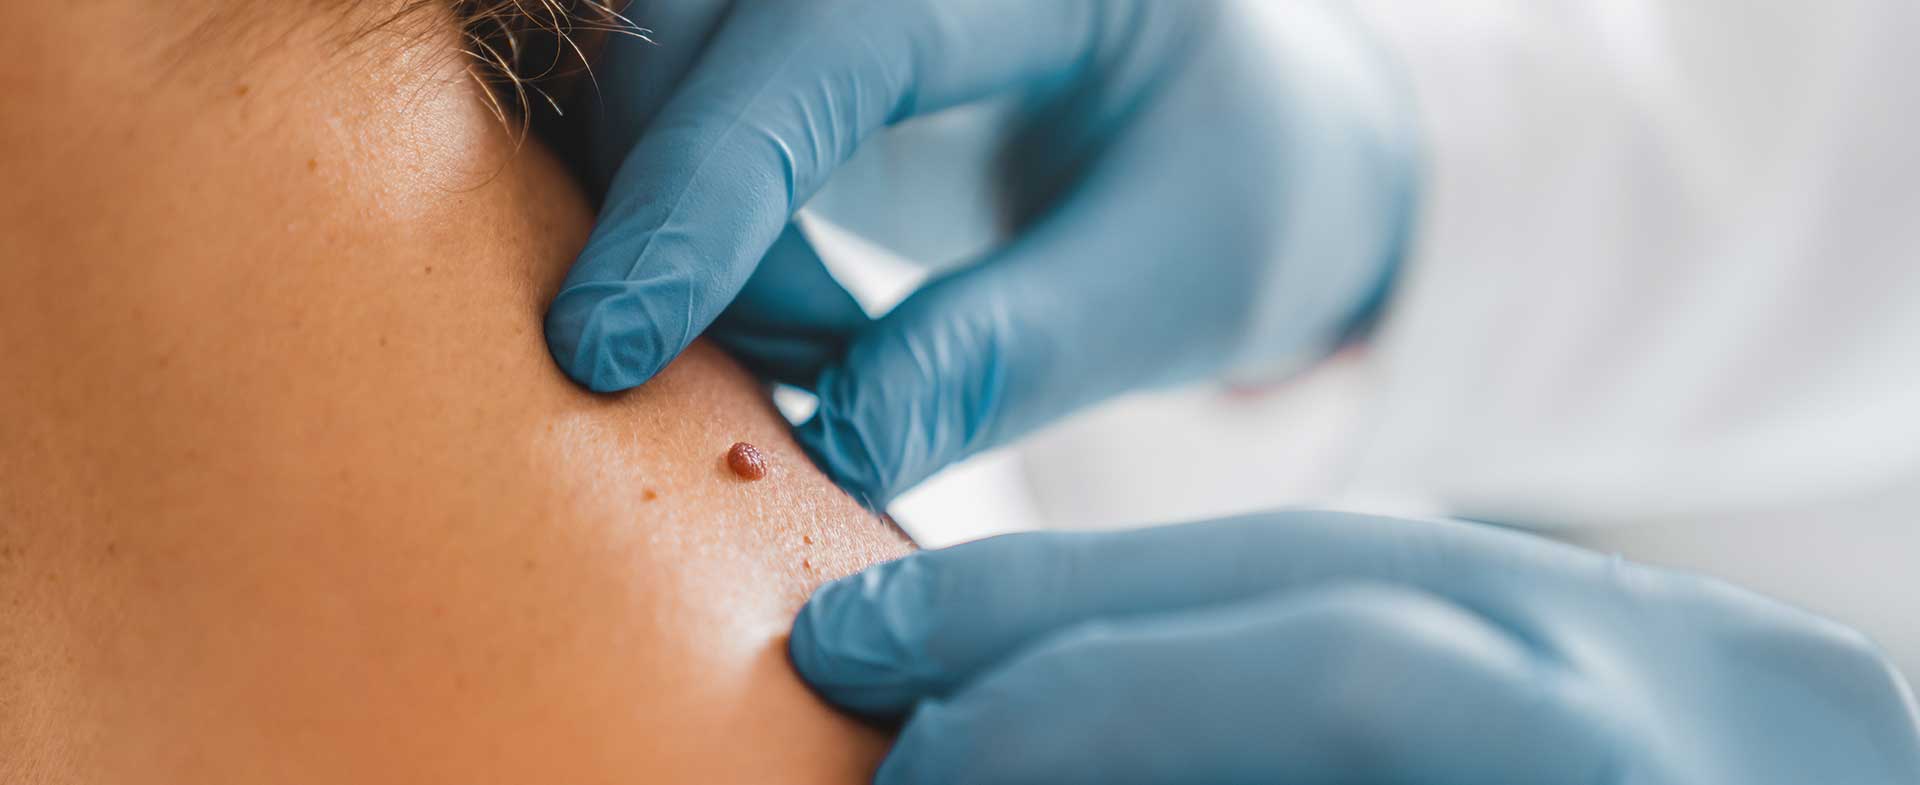 How To Prep For A Full Body Skin Cancer Exam